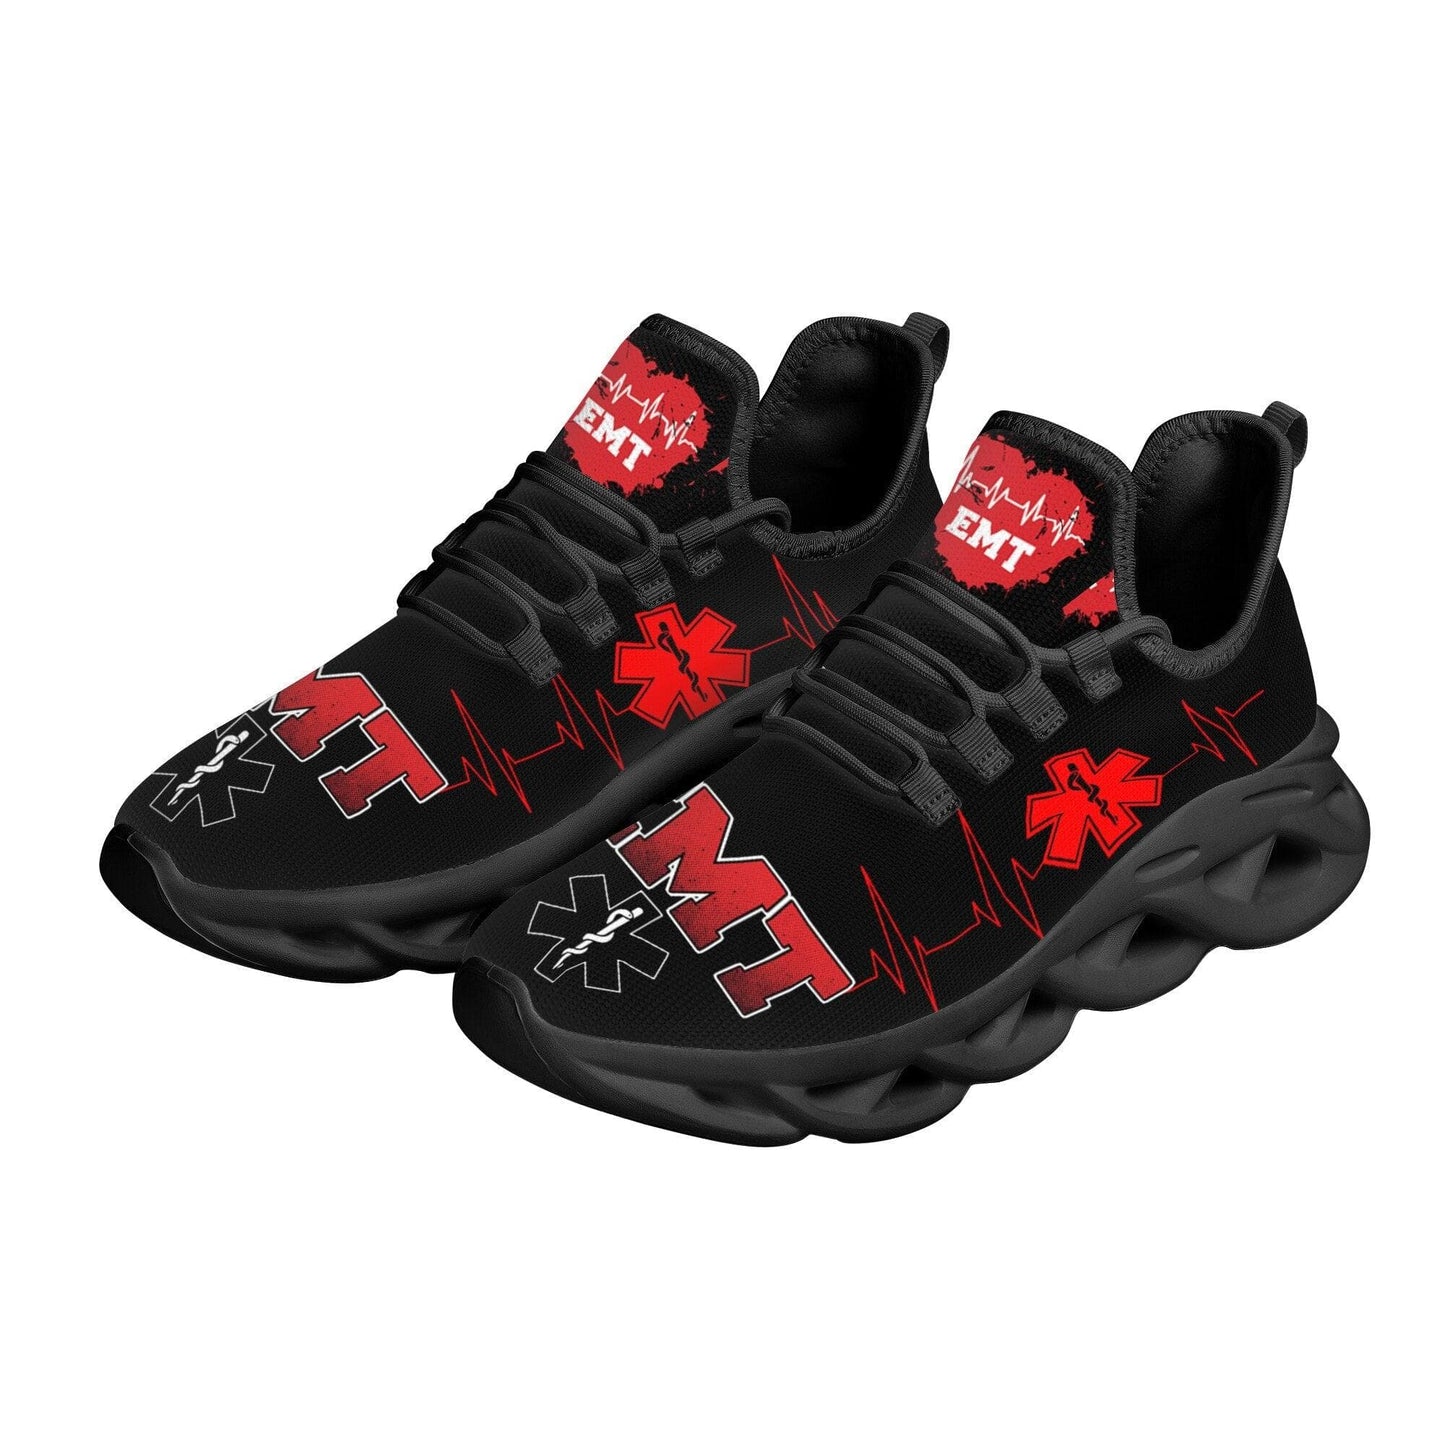 Paramedic EMT EMS Pattern Mesh Black Sneakers for Women Breathable Footwear - Thumbedtreats